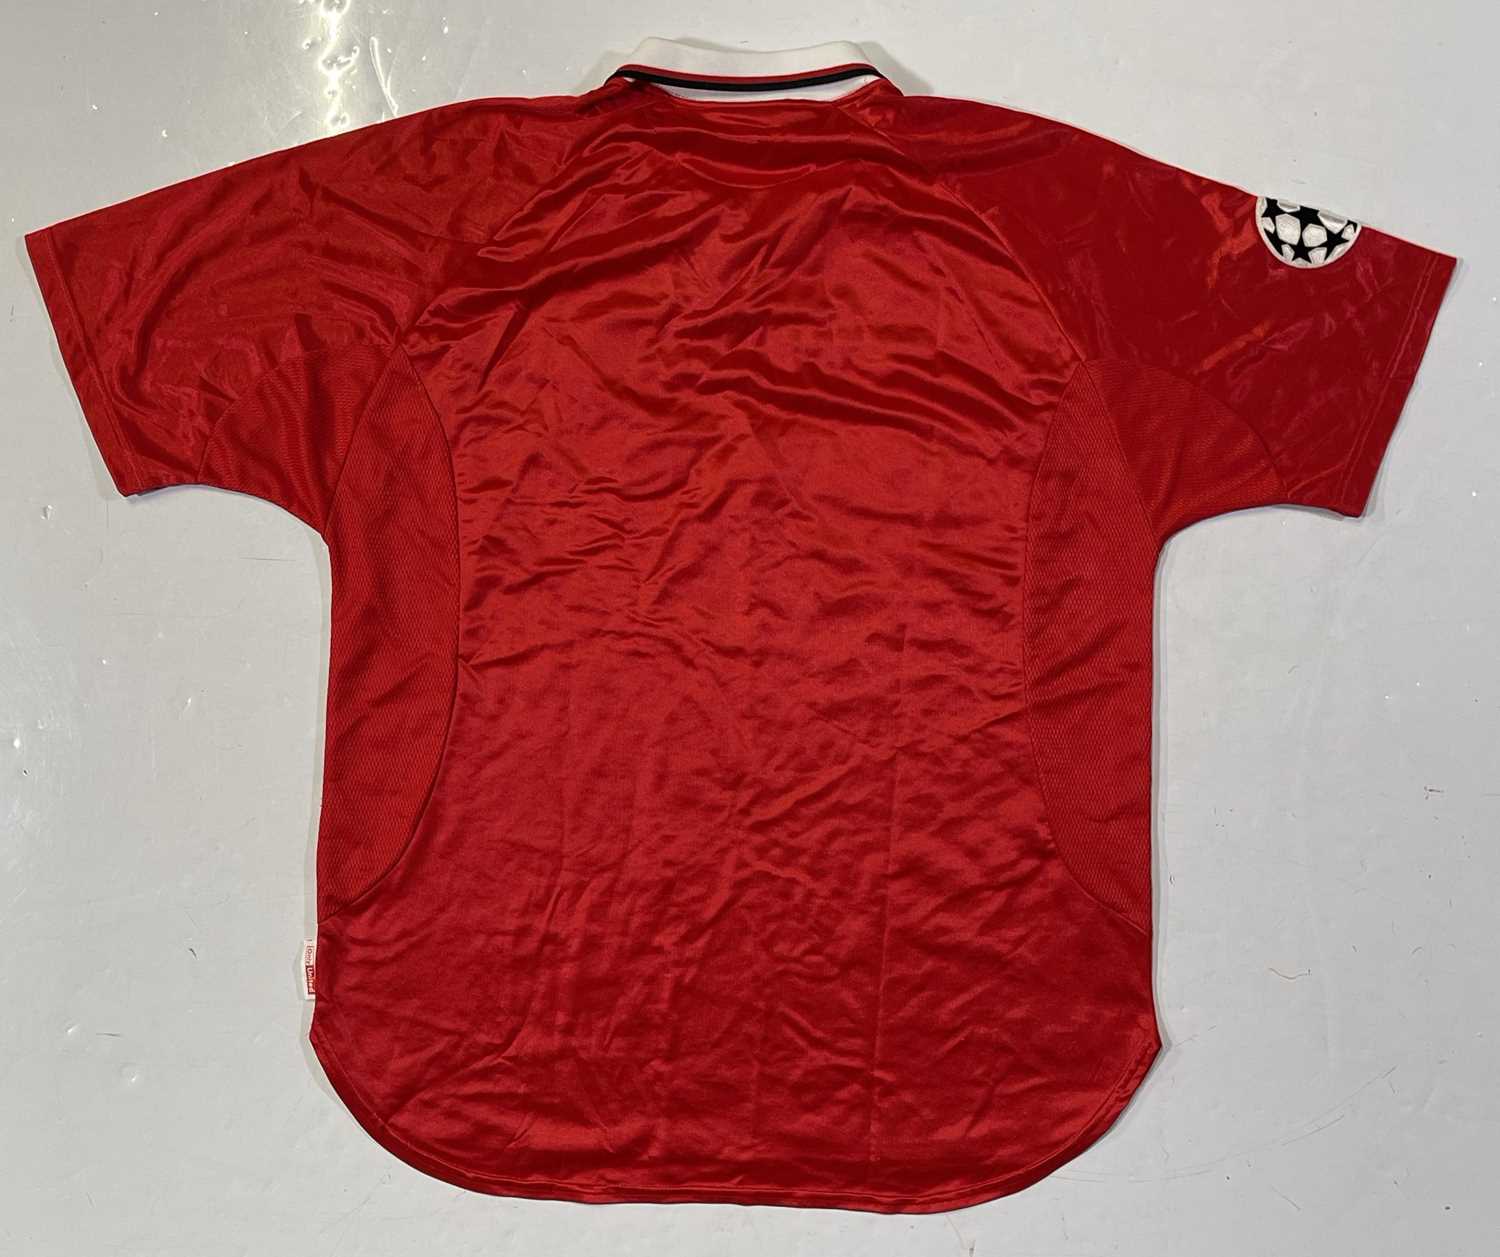 MANCHESTER UNITED - 1999 CHAMPION'S LEAGUE WINNERS HOME SHIRT. - Image 2 of 2